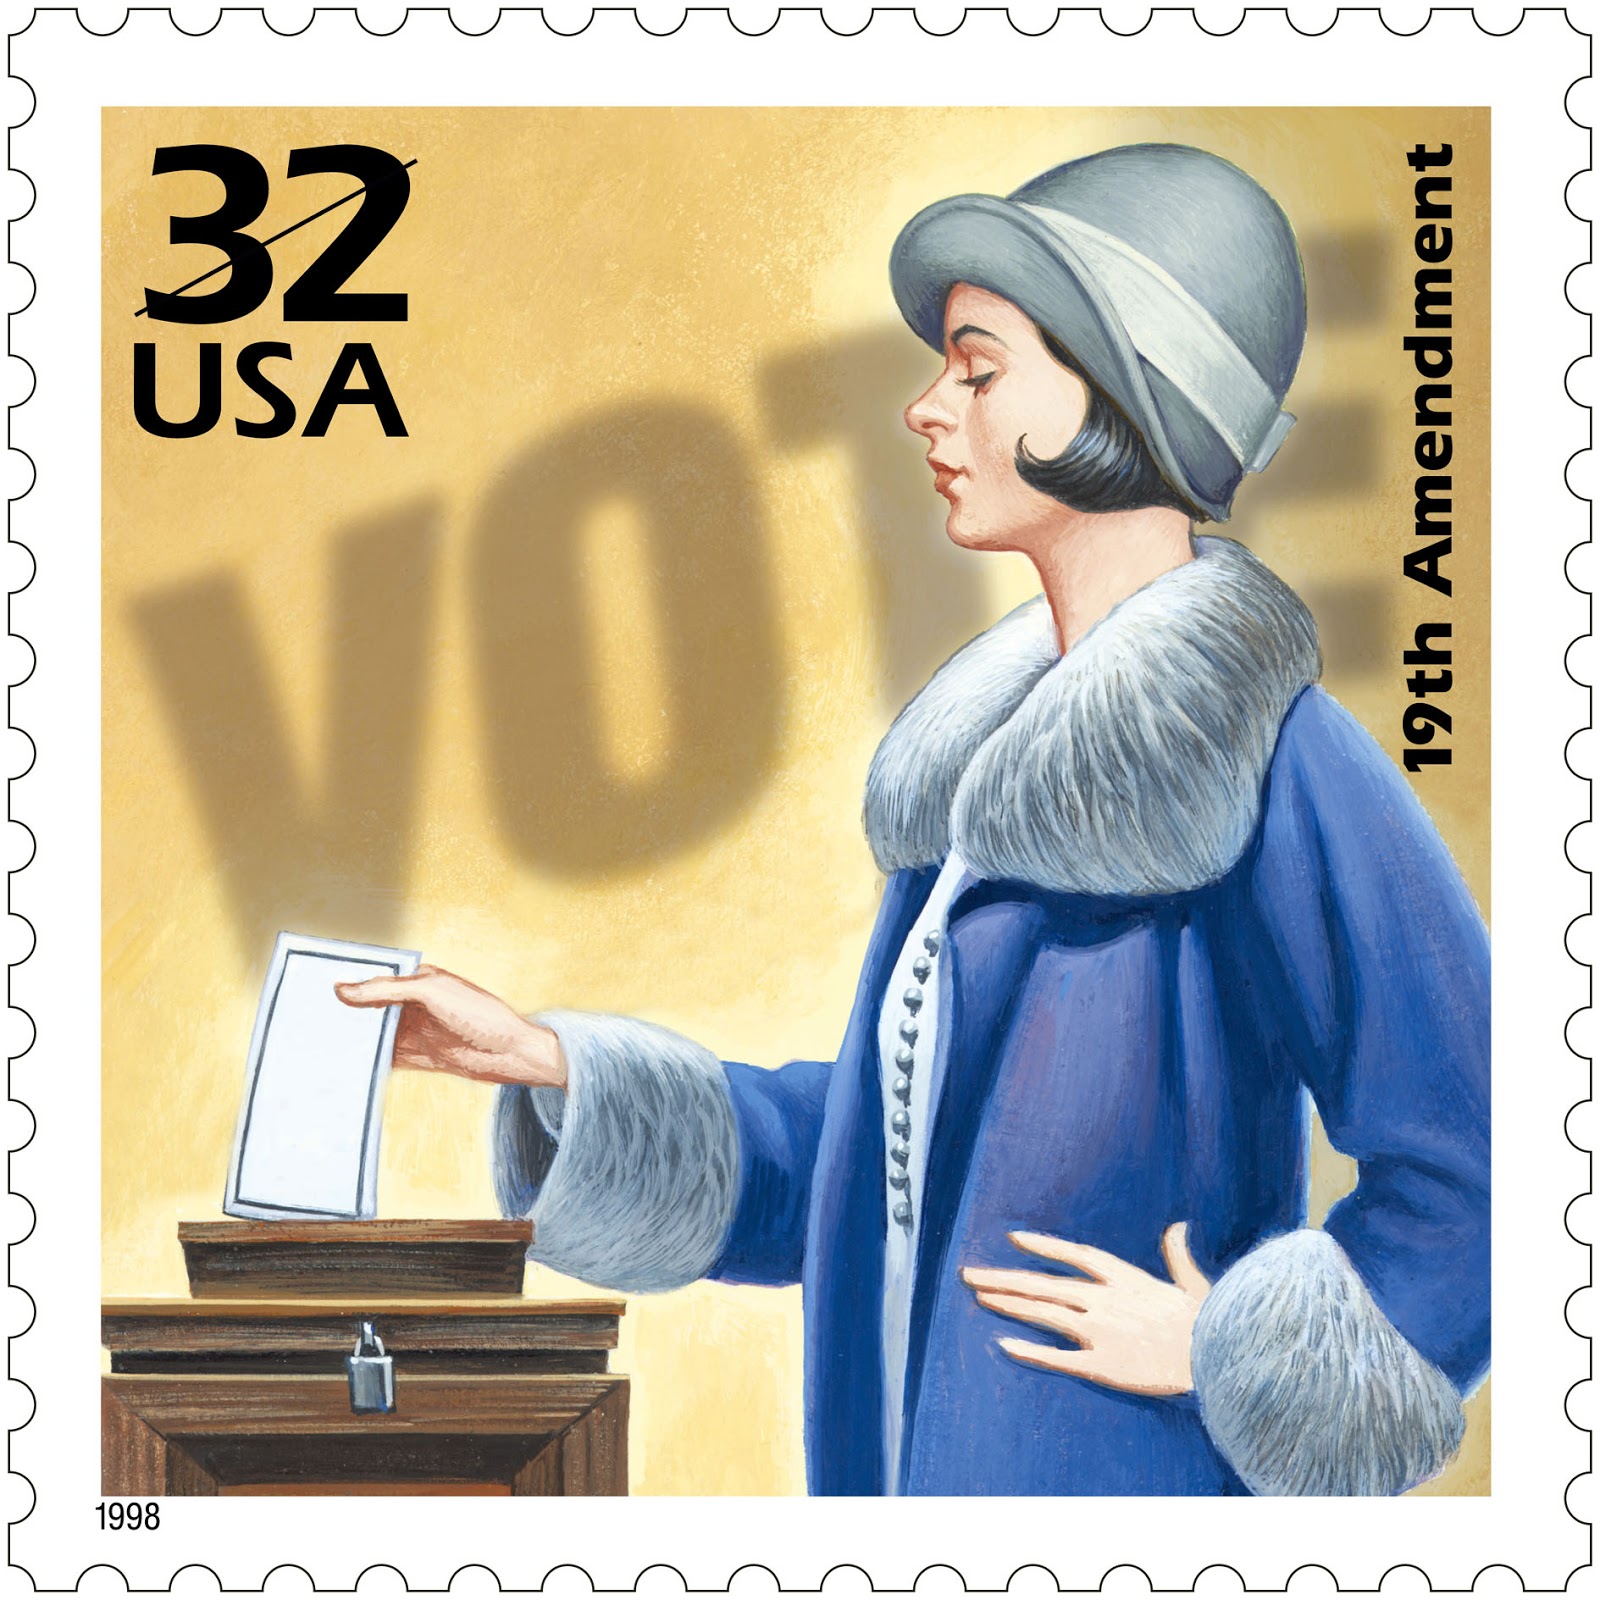 us-citizenship-podcast-happy-women-s-suffrage-day